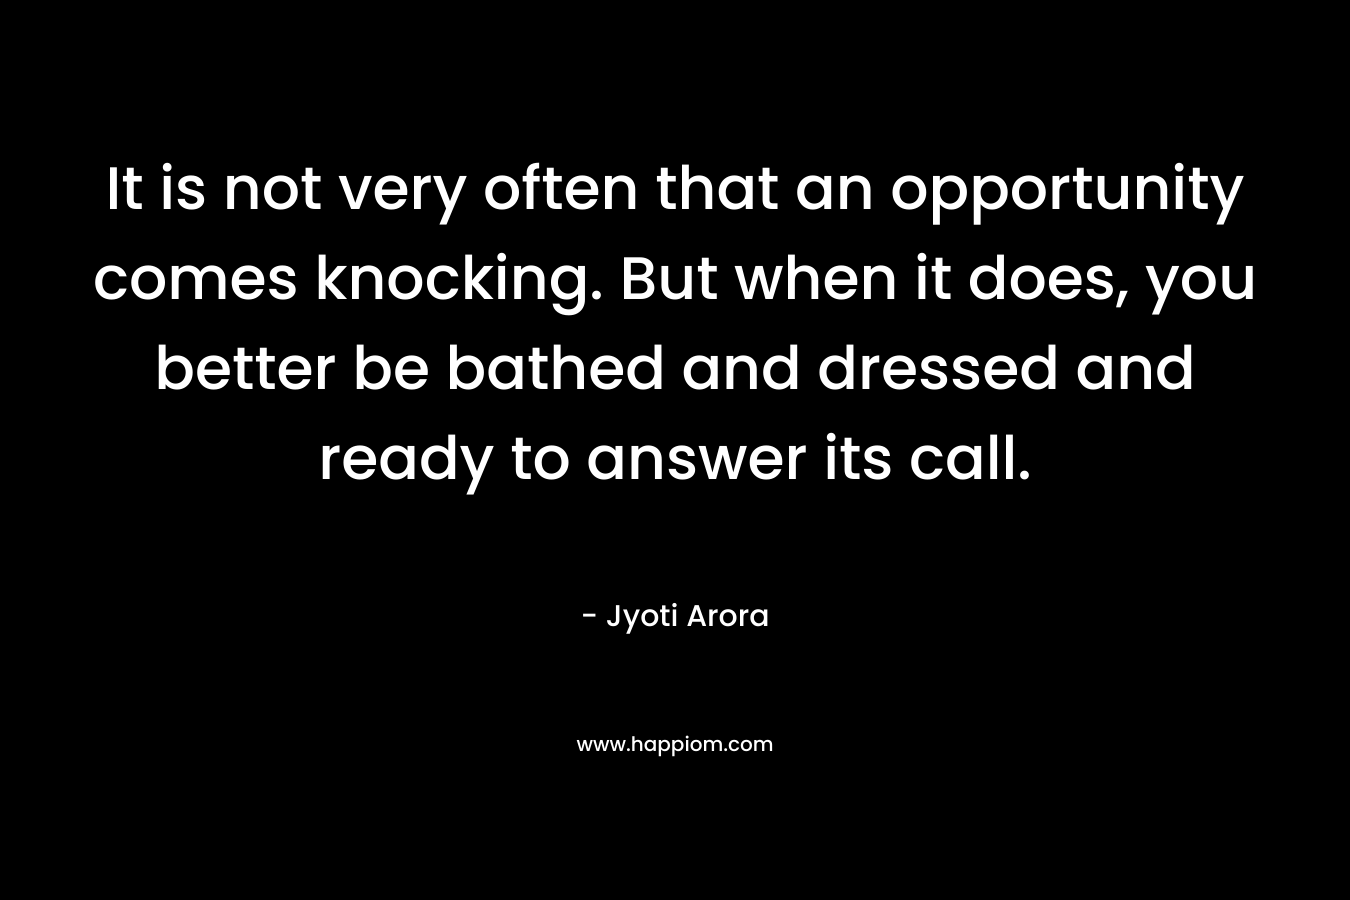 It is not very often that an opportunity comes knocking. But when it does, you better be bathed and dressed and ready to answer its call.